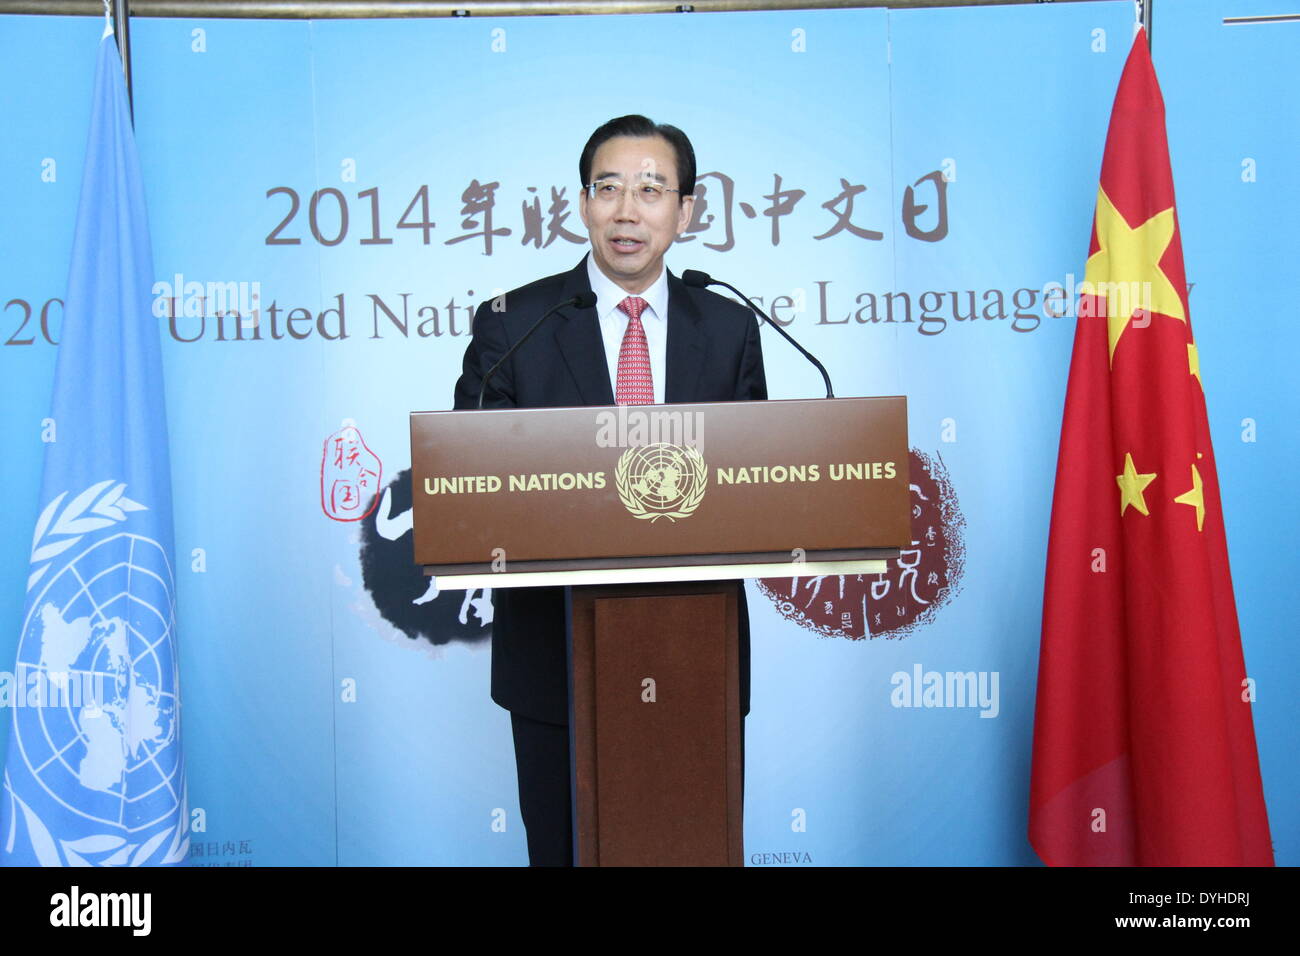 Geneva. 18th Apr, 2014. Wu Hailong, Chinese representative to the United Nations Office at Geneva and Other International Organizations in Switzerland, addresses the Chinese hieroglyphs exhibition in Geneva, Switzerland, April 17, 2014. The exhibition was held as part of the activities marking the 2014 United Nations Chinese Language Day. © Xinhua/Alamy Live News Stock Photo